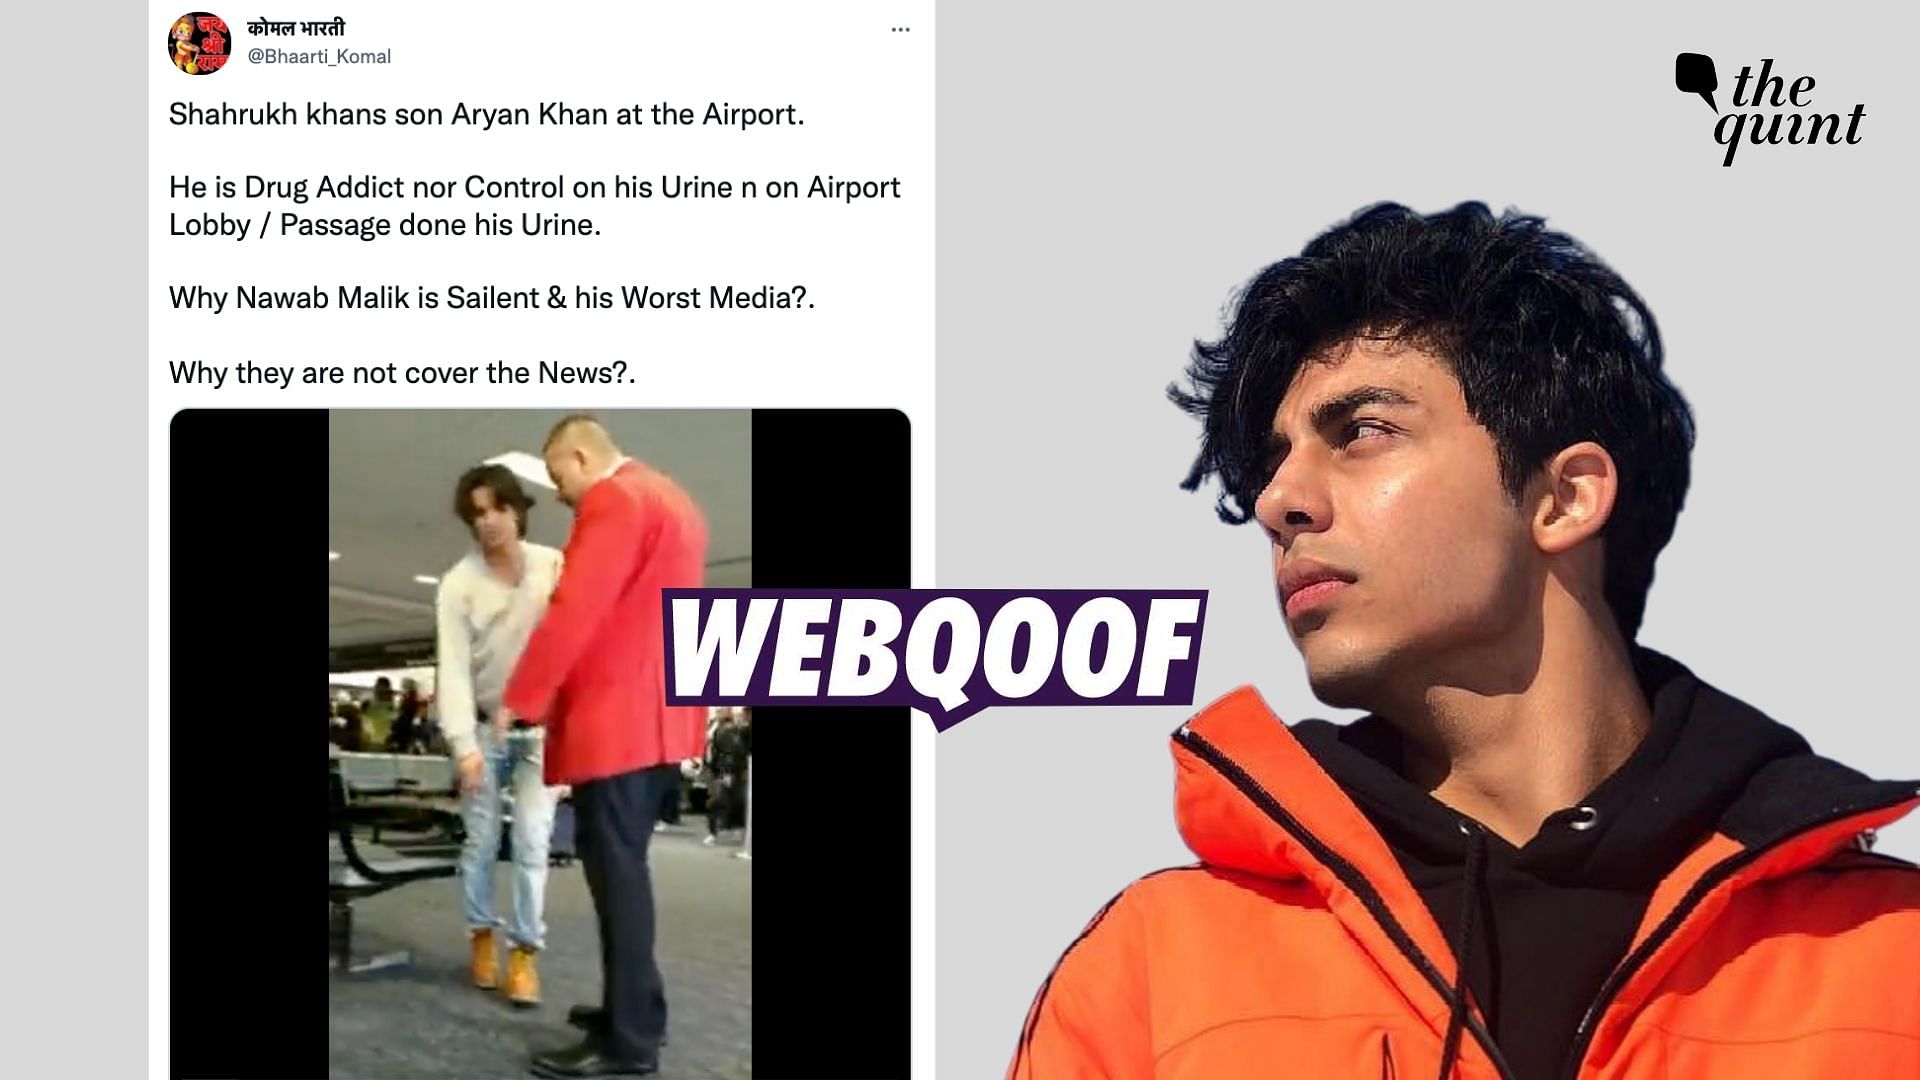 <div class="paragraphs"><p>The claim was that the video showed Shah Rukh Khan's son Aryan Khan publicly urinating on the floor of an airport lobby.&nbsp;</p></div>